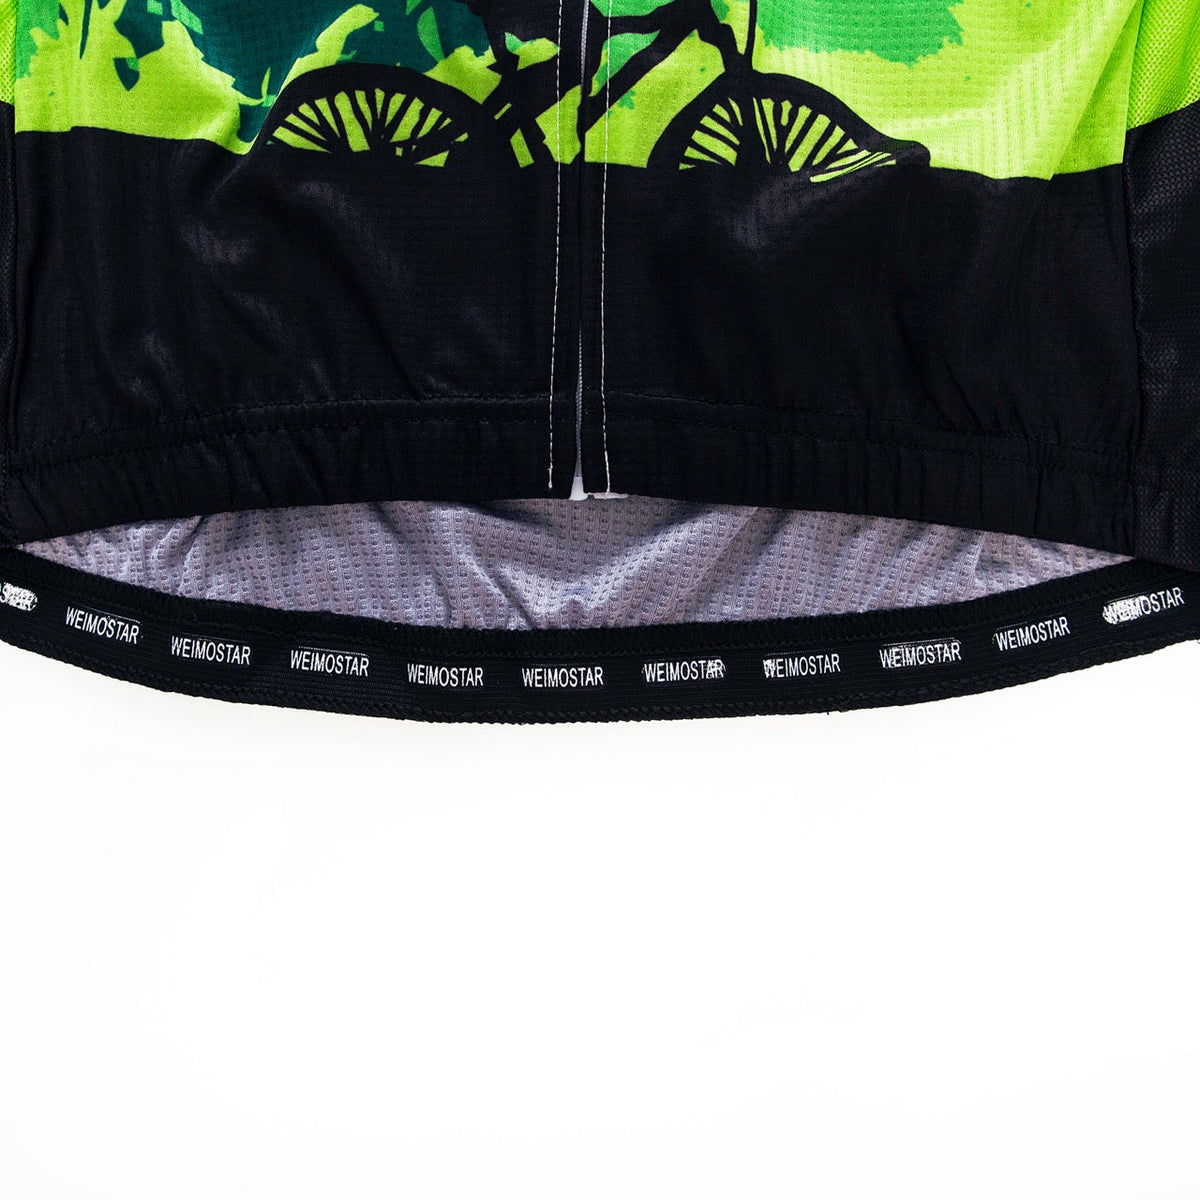 Green Forest Riding | Men's Short Sleeve Cycling Jersey